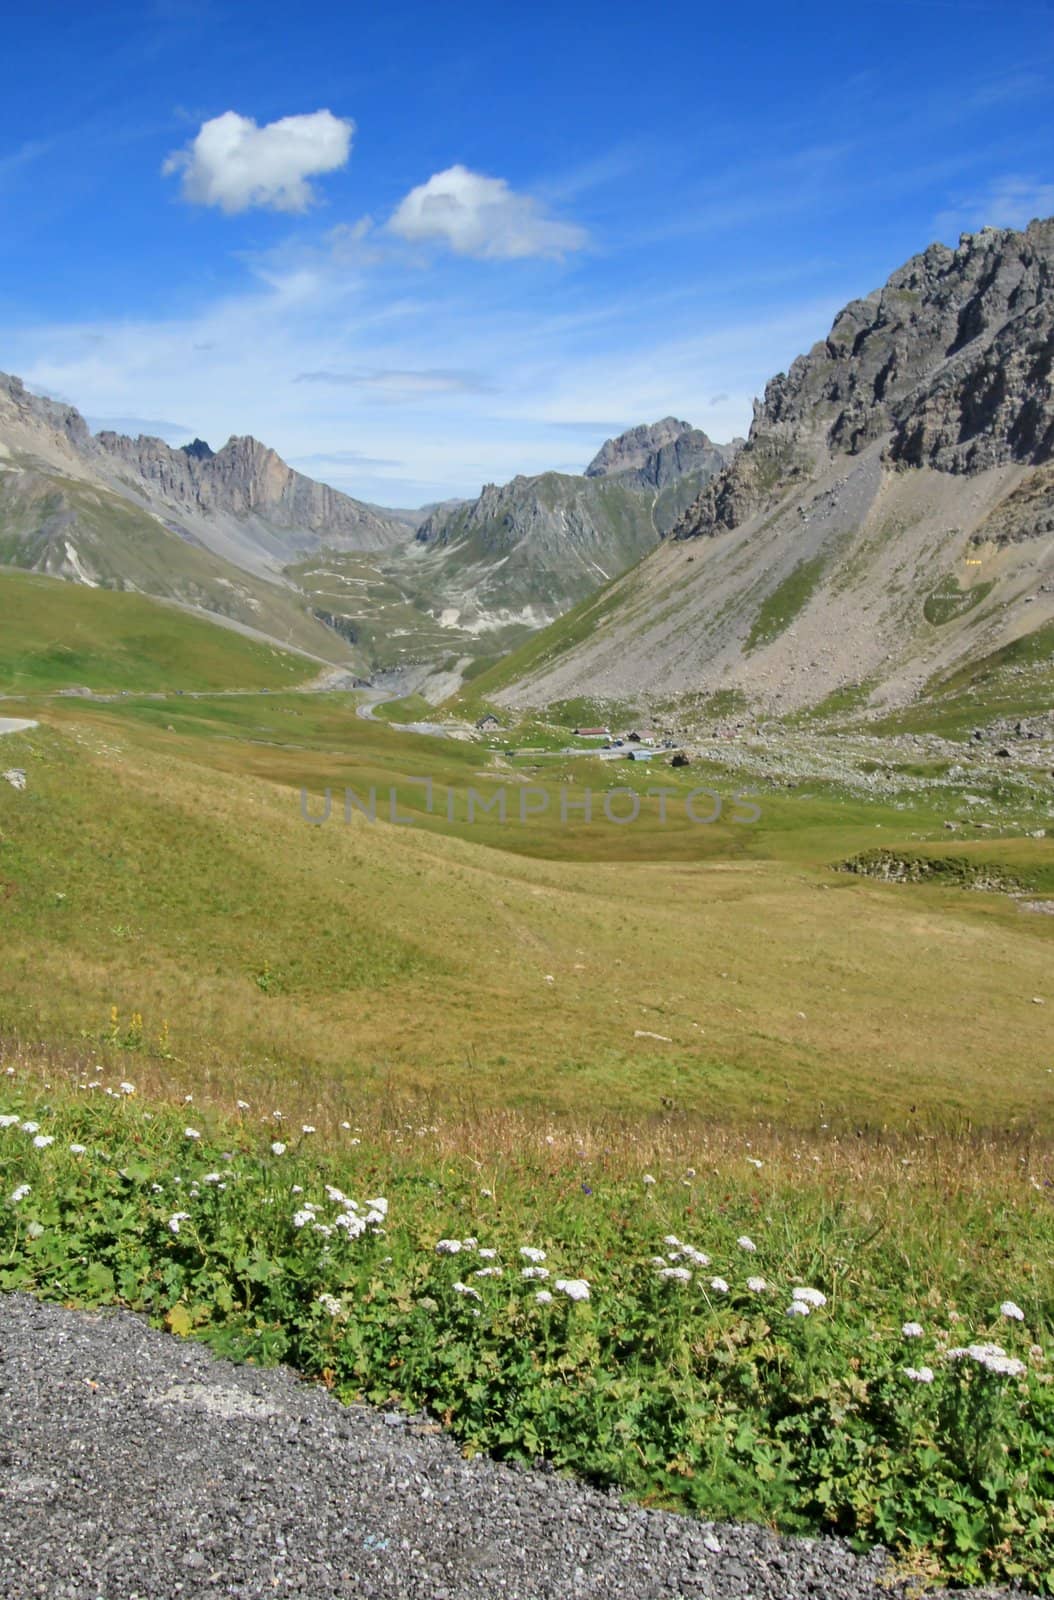 Landscape of the mountain with the rocks, grass and flowers at the Galibier pass, France, by summer